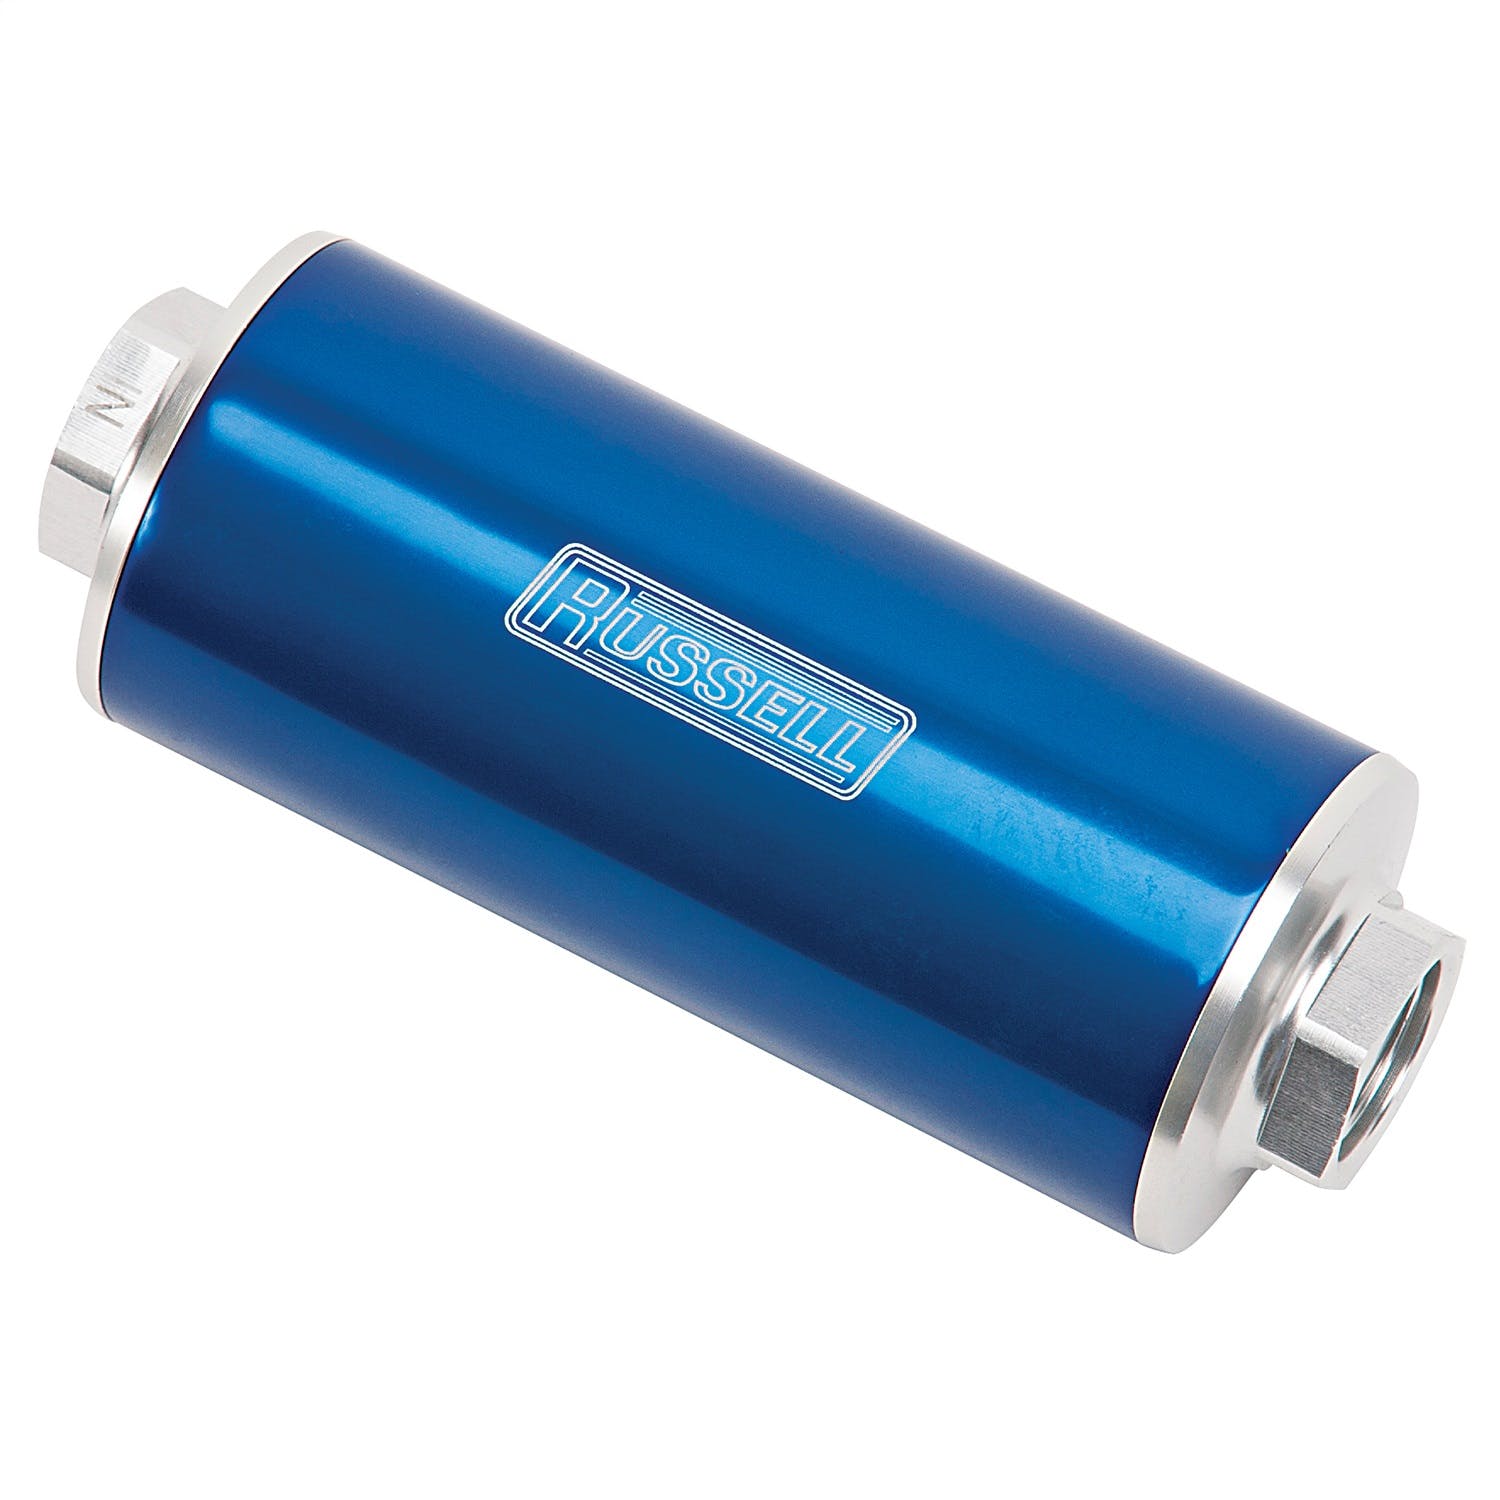 Russell 649252 Fuel filter, Profilter, 6 in. long, 10 Micron, #10 AN Inlet/#10 AN Outlet,